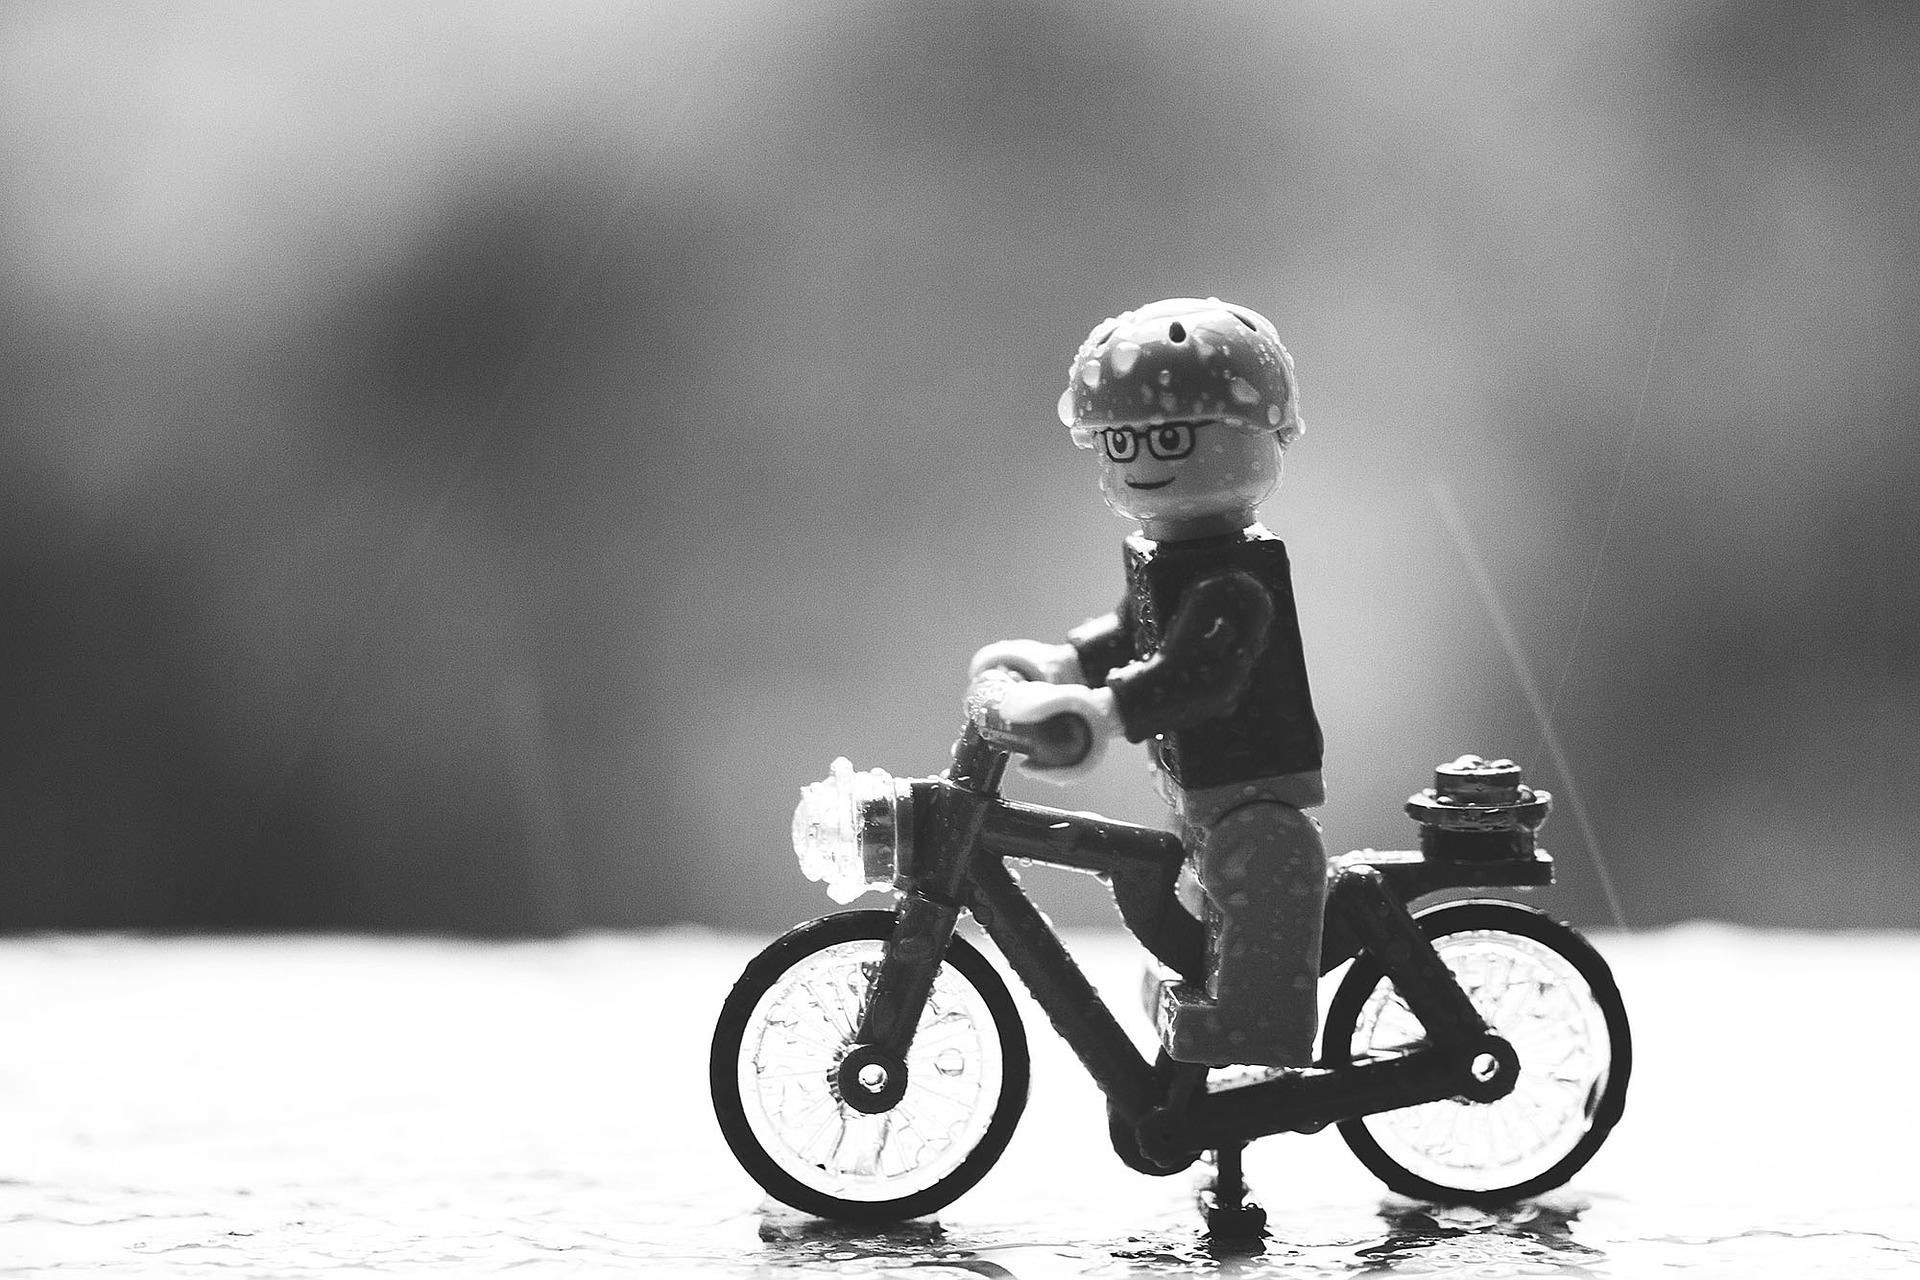 Black and white image of Lego figure on miniature bicycle